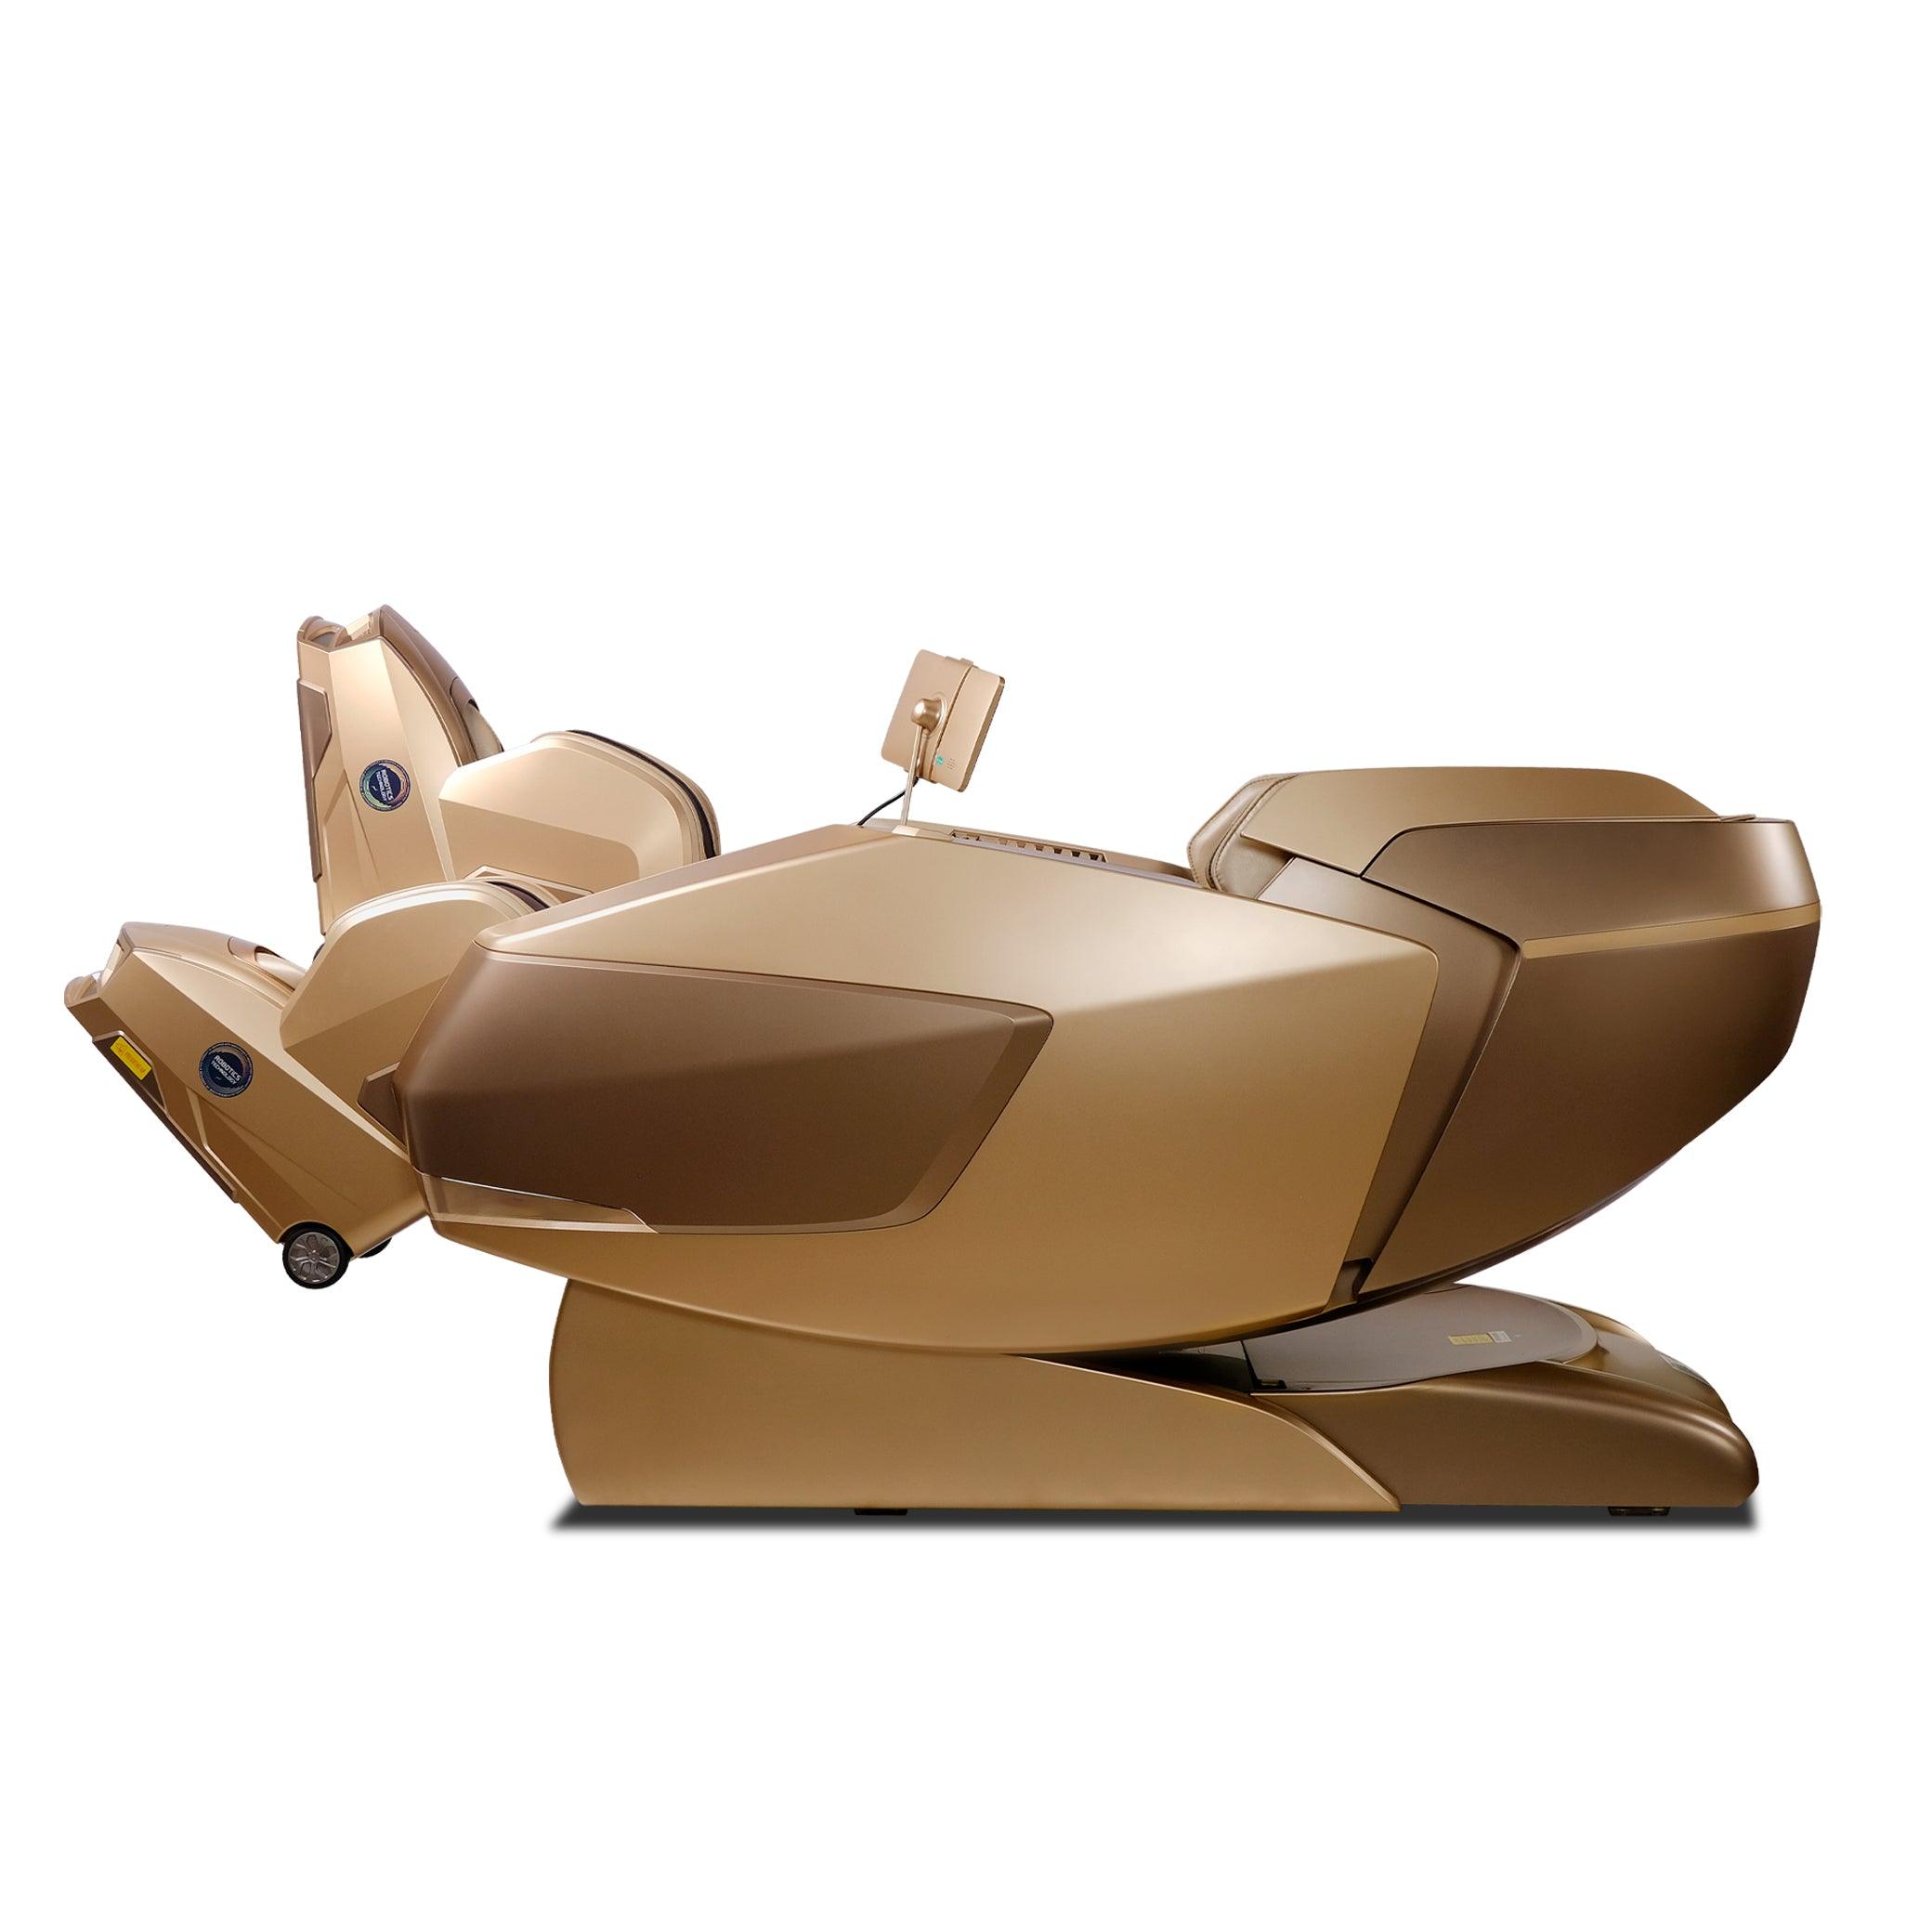 Best massage chair UAE - AI Robotic Massage Chair in Sleek Golden with Rovo Walking Technology and full body airbags for comprehensive care. best massage chair uae, massage chair Dubai, massage chair uae, massage chair Saudi Arabia, كرسي التدليك, Best mas